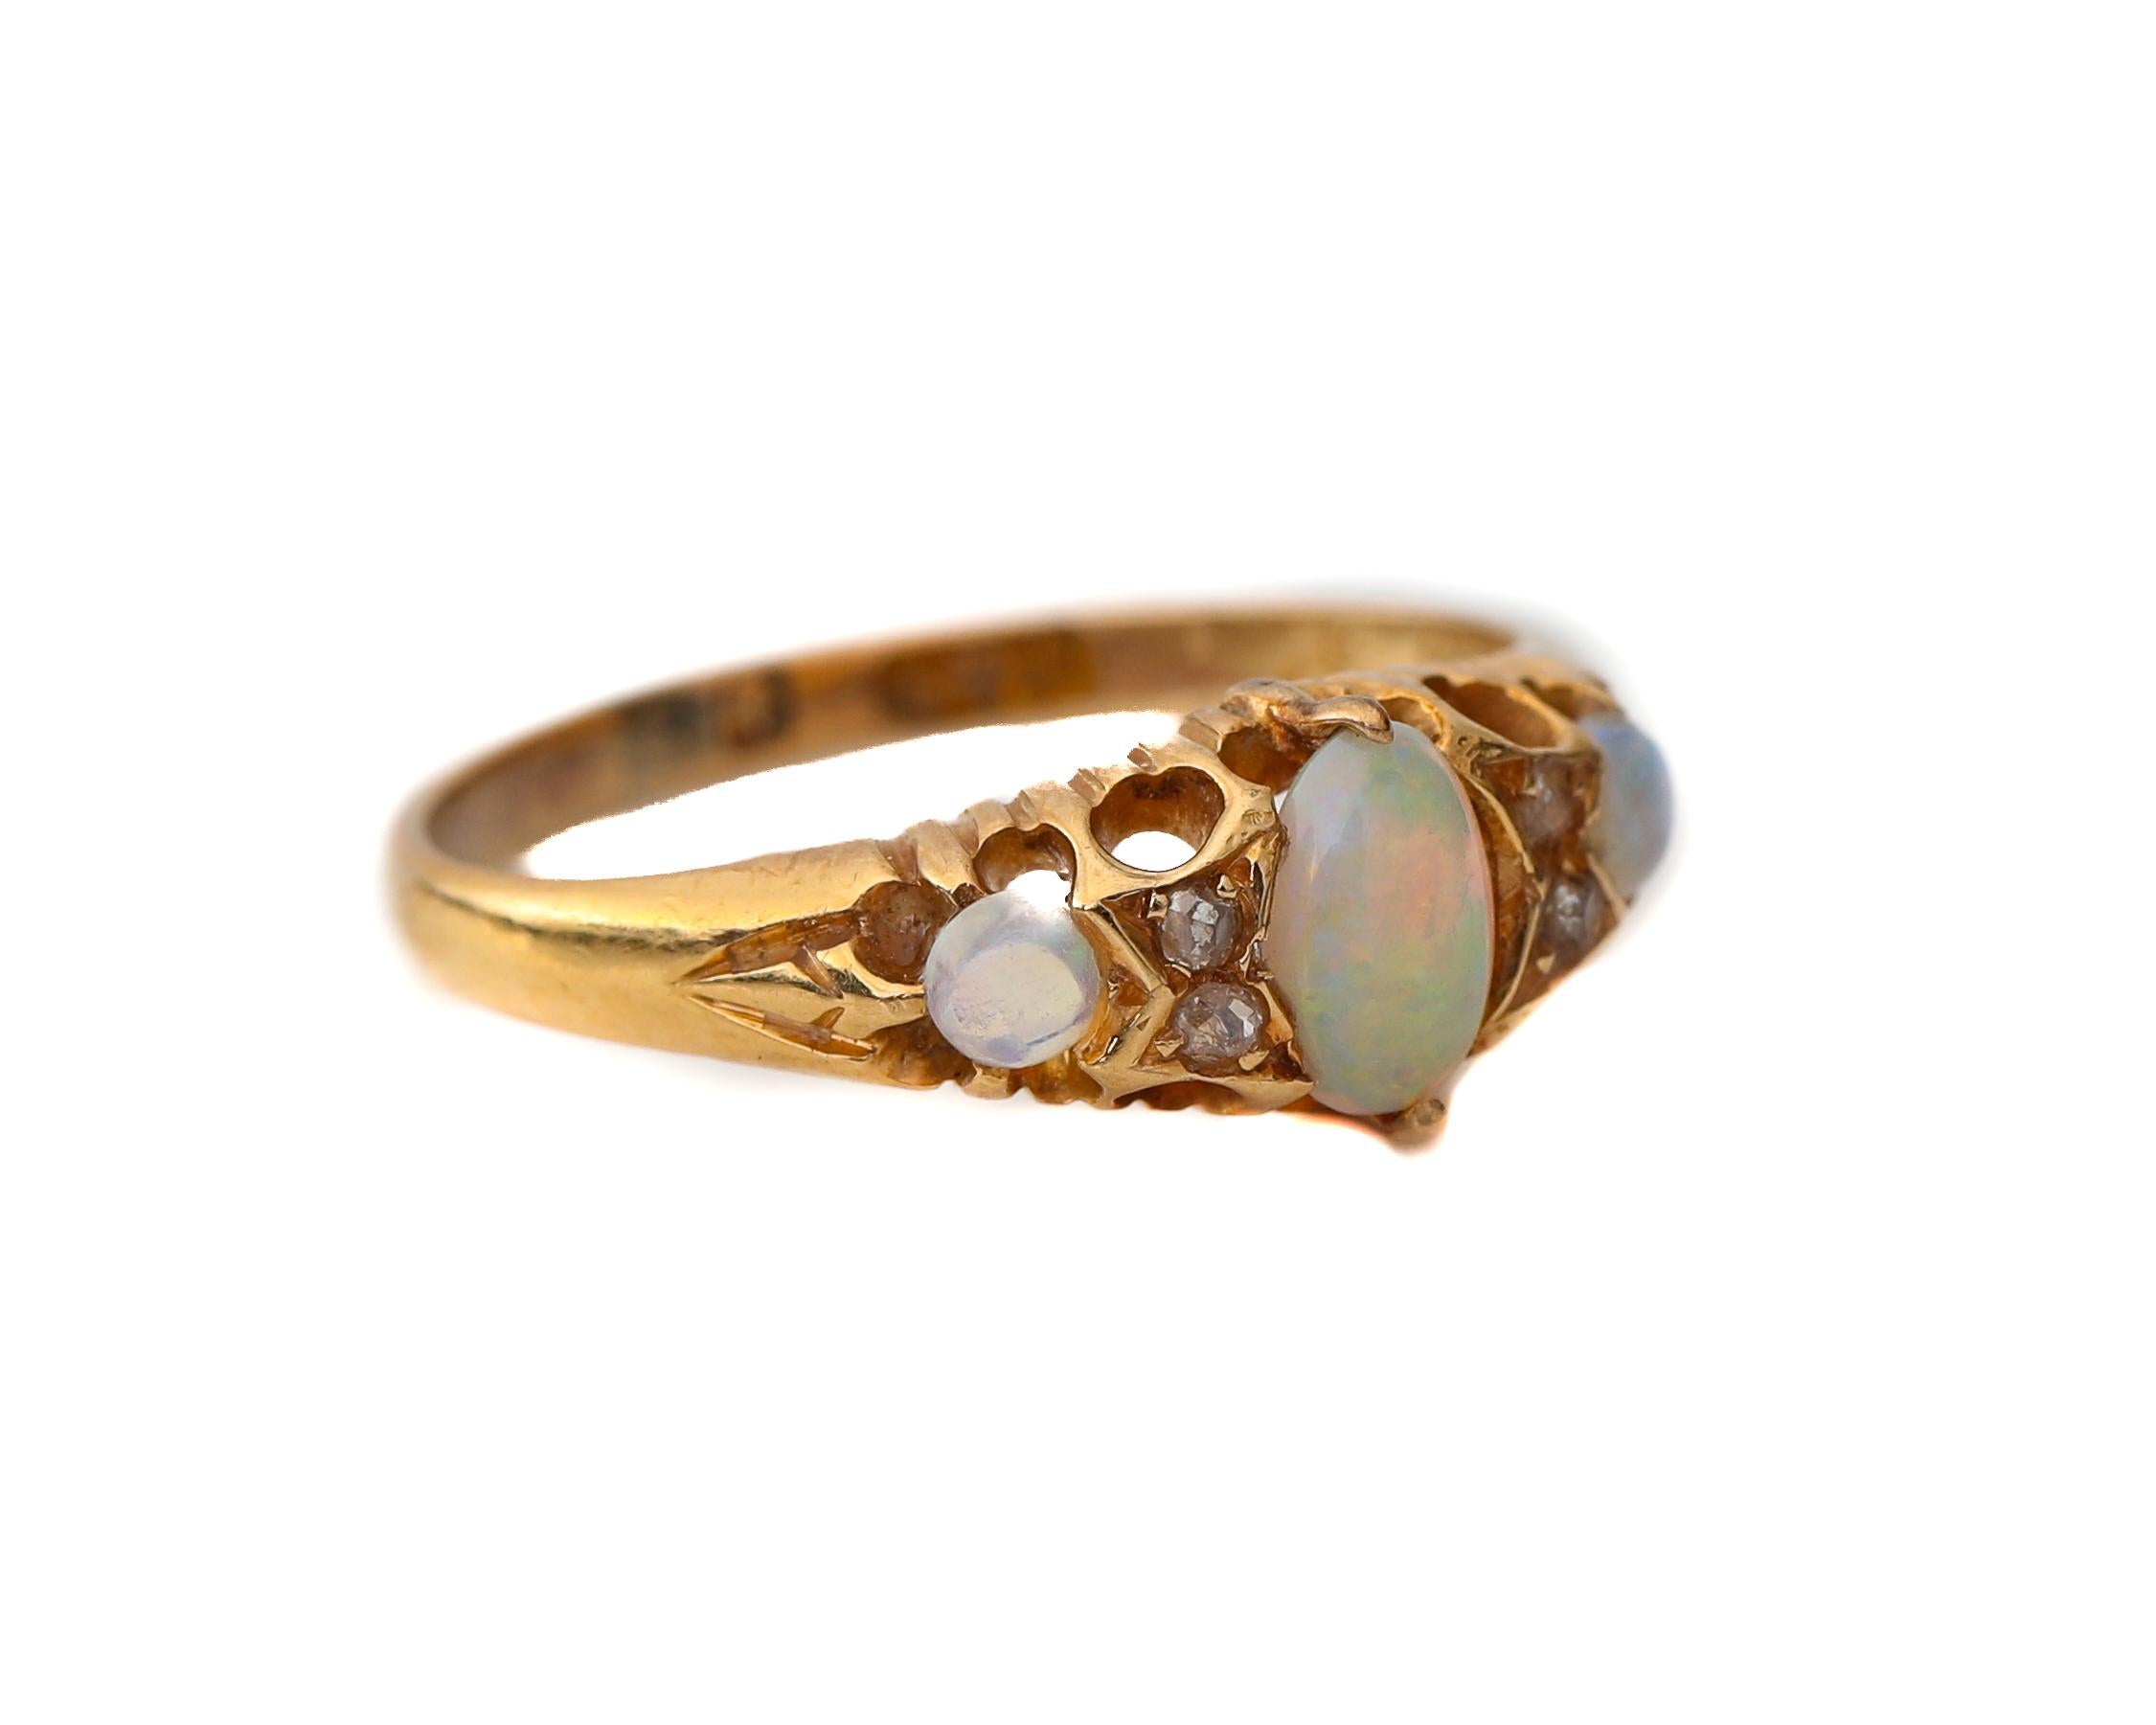 Oval Cut 18 Karat Hand Etched Victorian Opal Ring with Diamond Accents